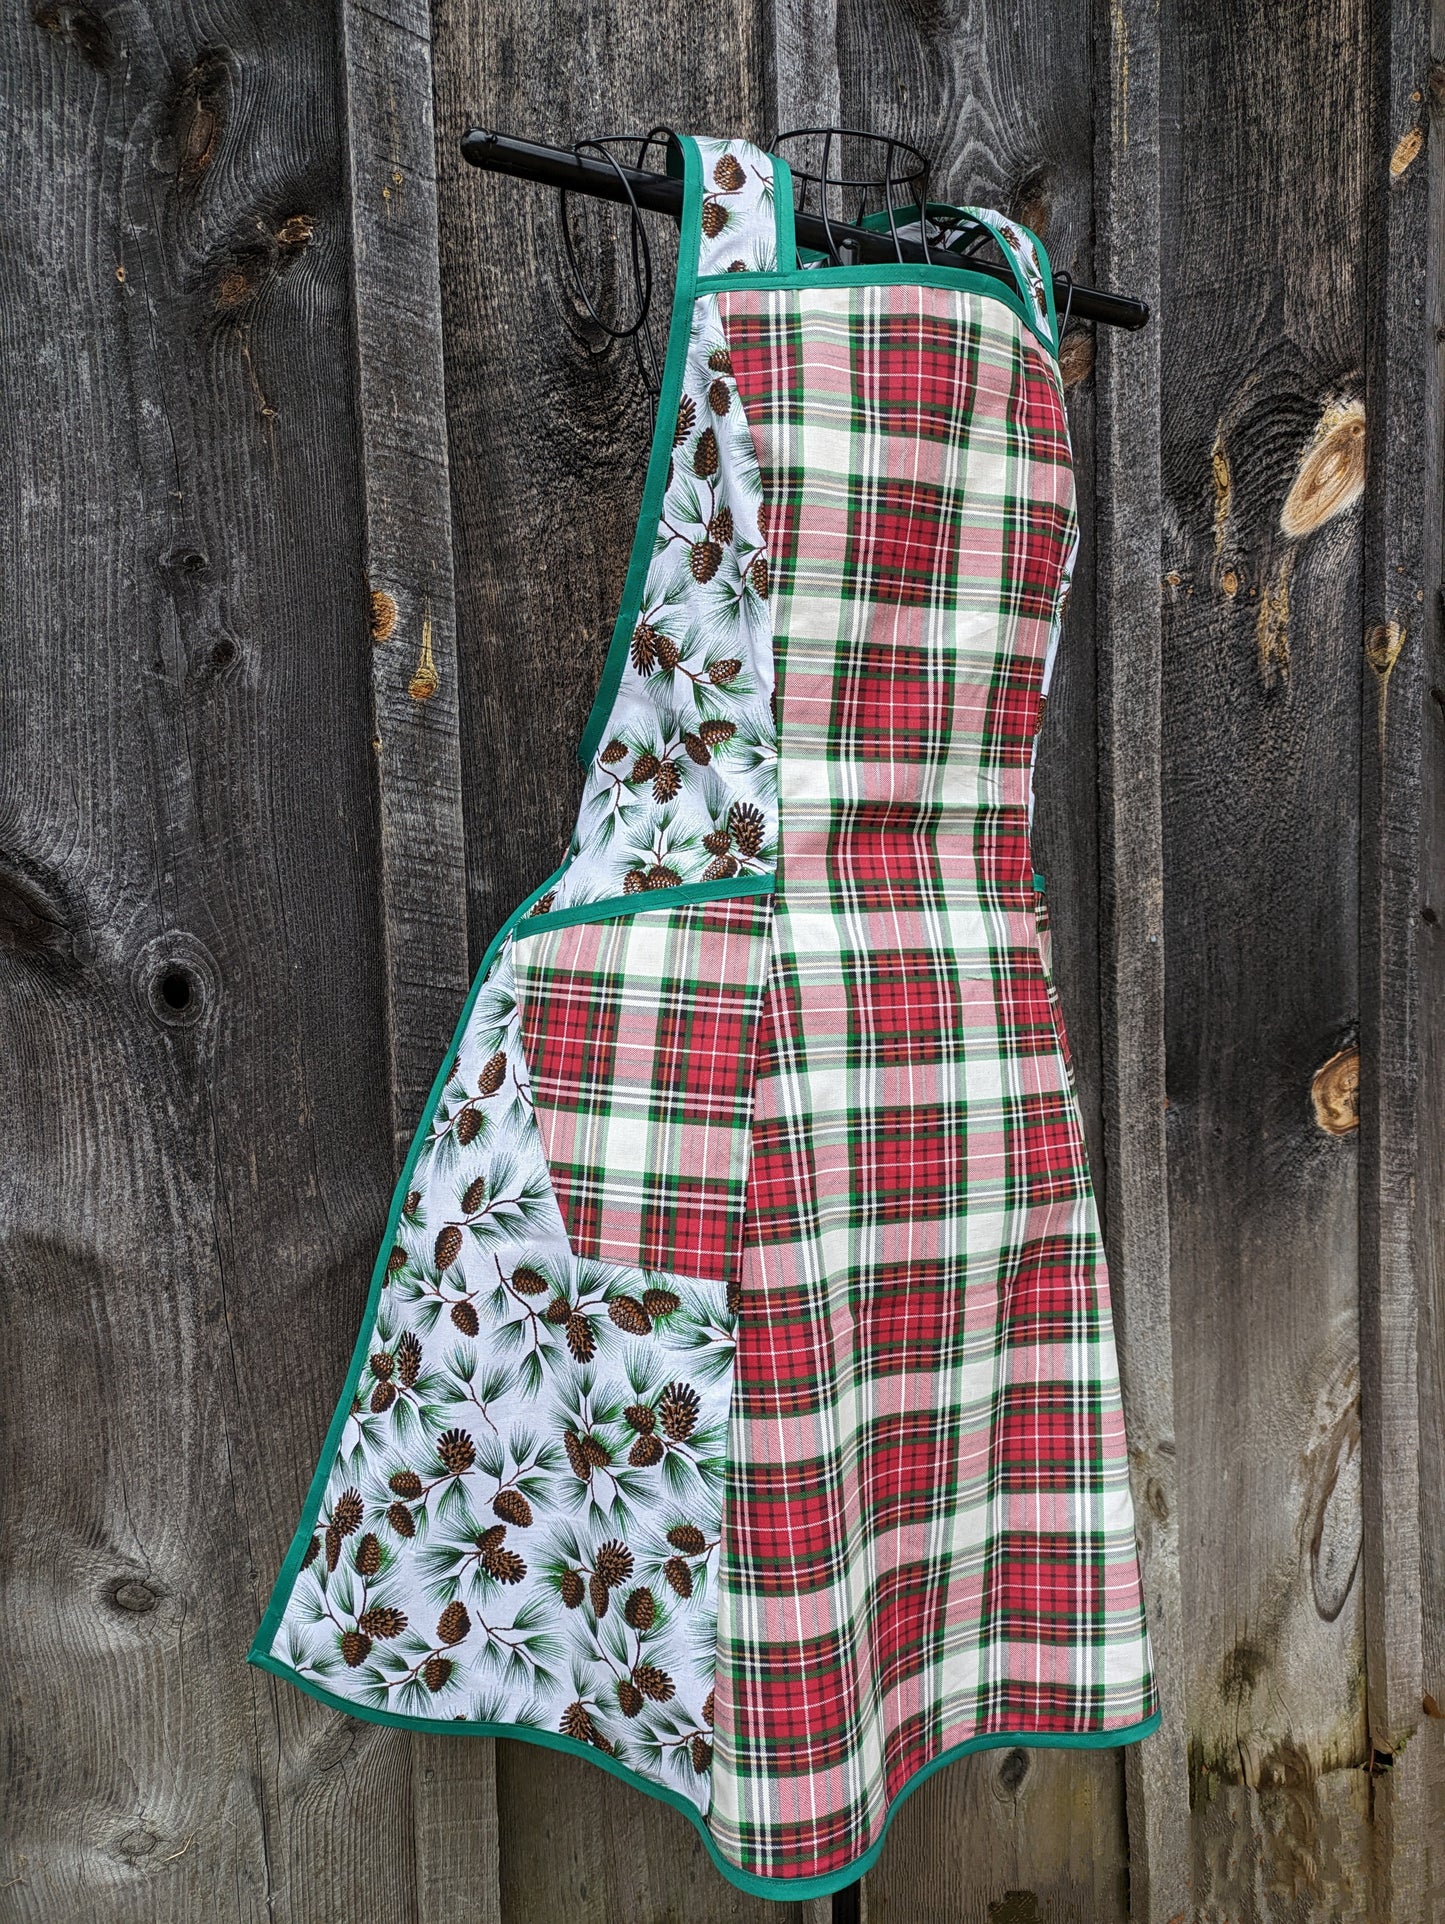 Festive holiday apron featuring a front panel of red and green plaid and sides of glittery pine fabric. Has two pockets and ties in back 